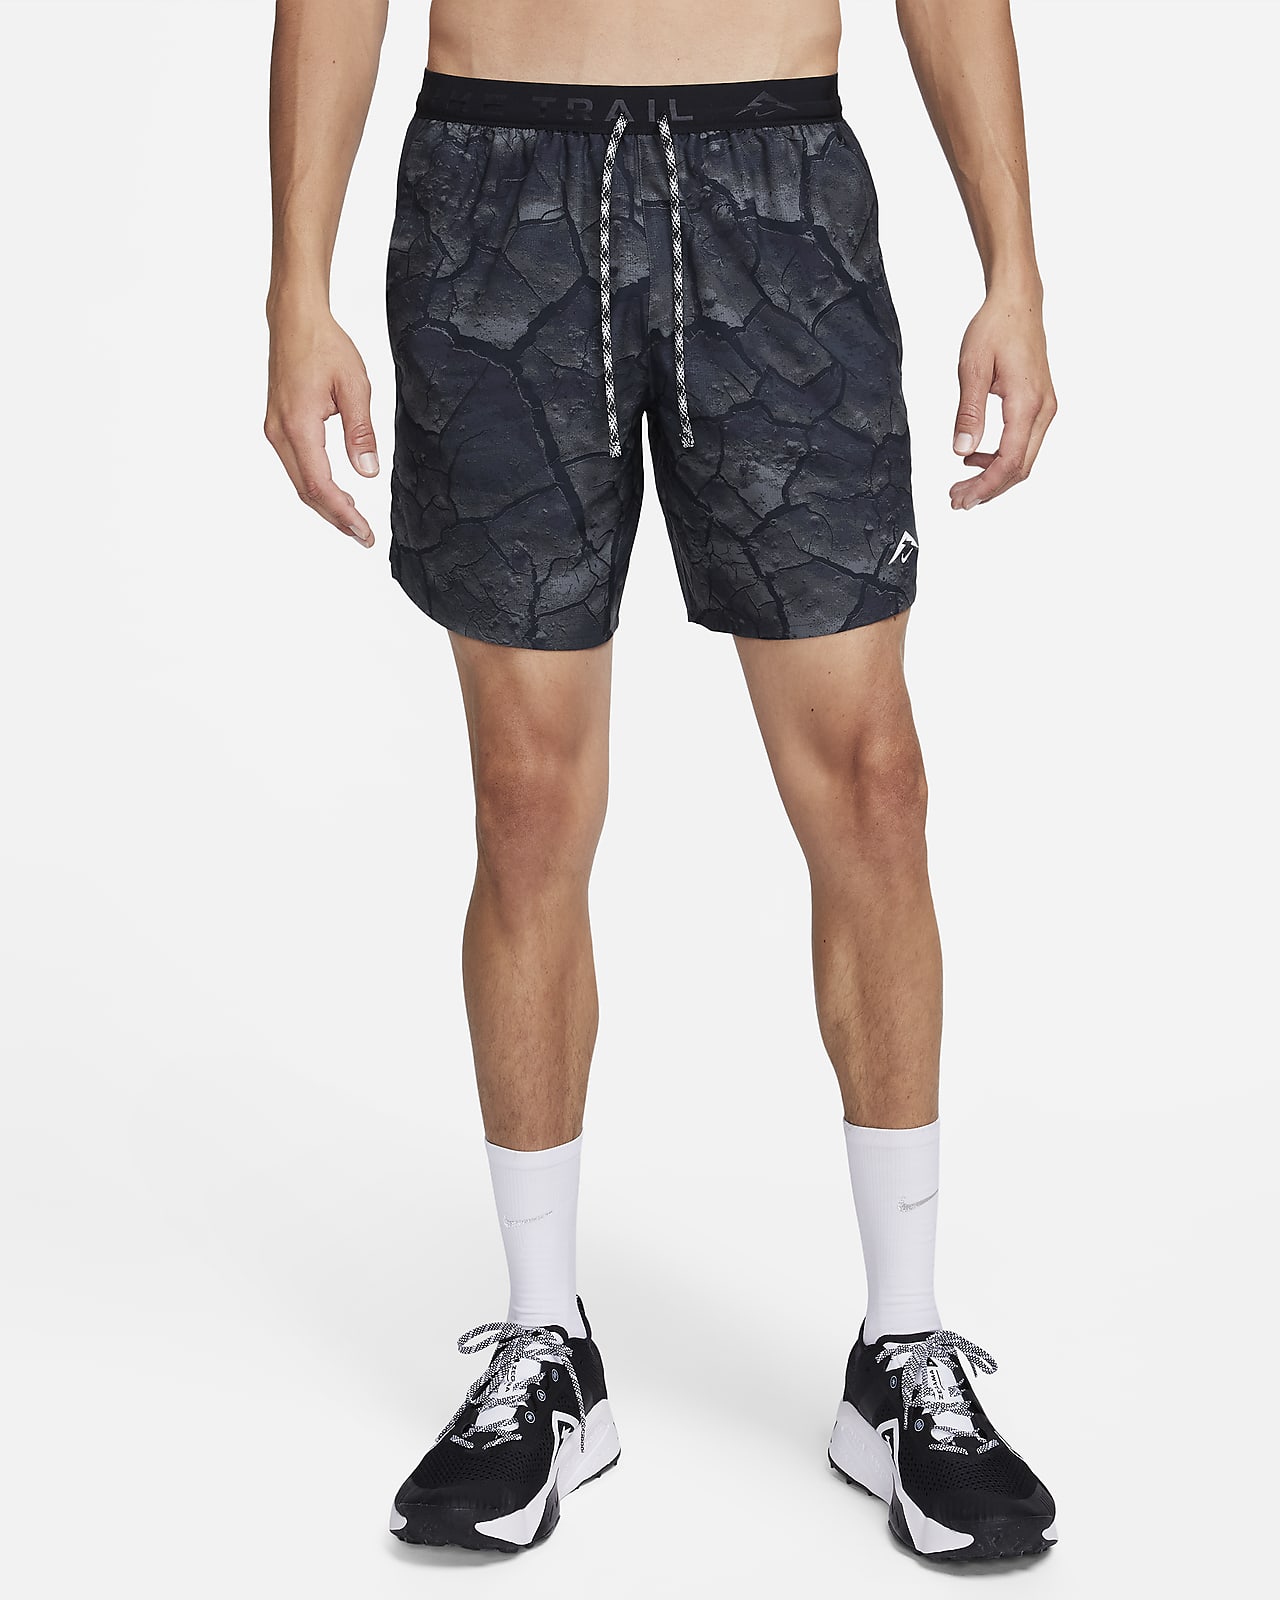 Nike Dri-FIT Stride Men's 7 Brief-Lined Printed Running Shorts.